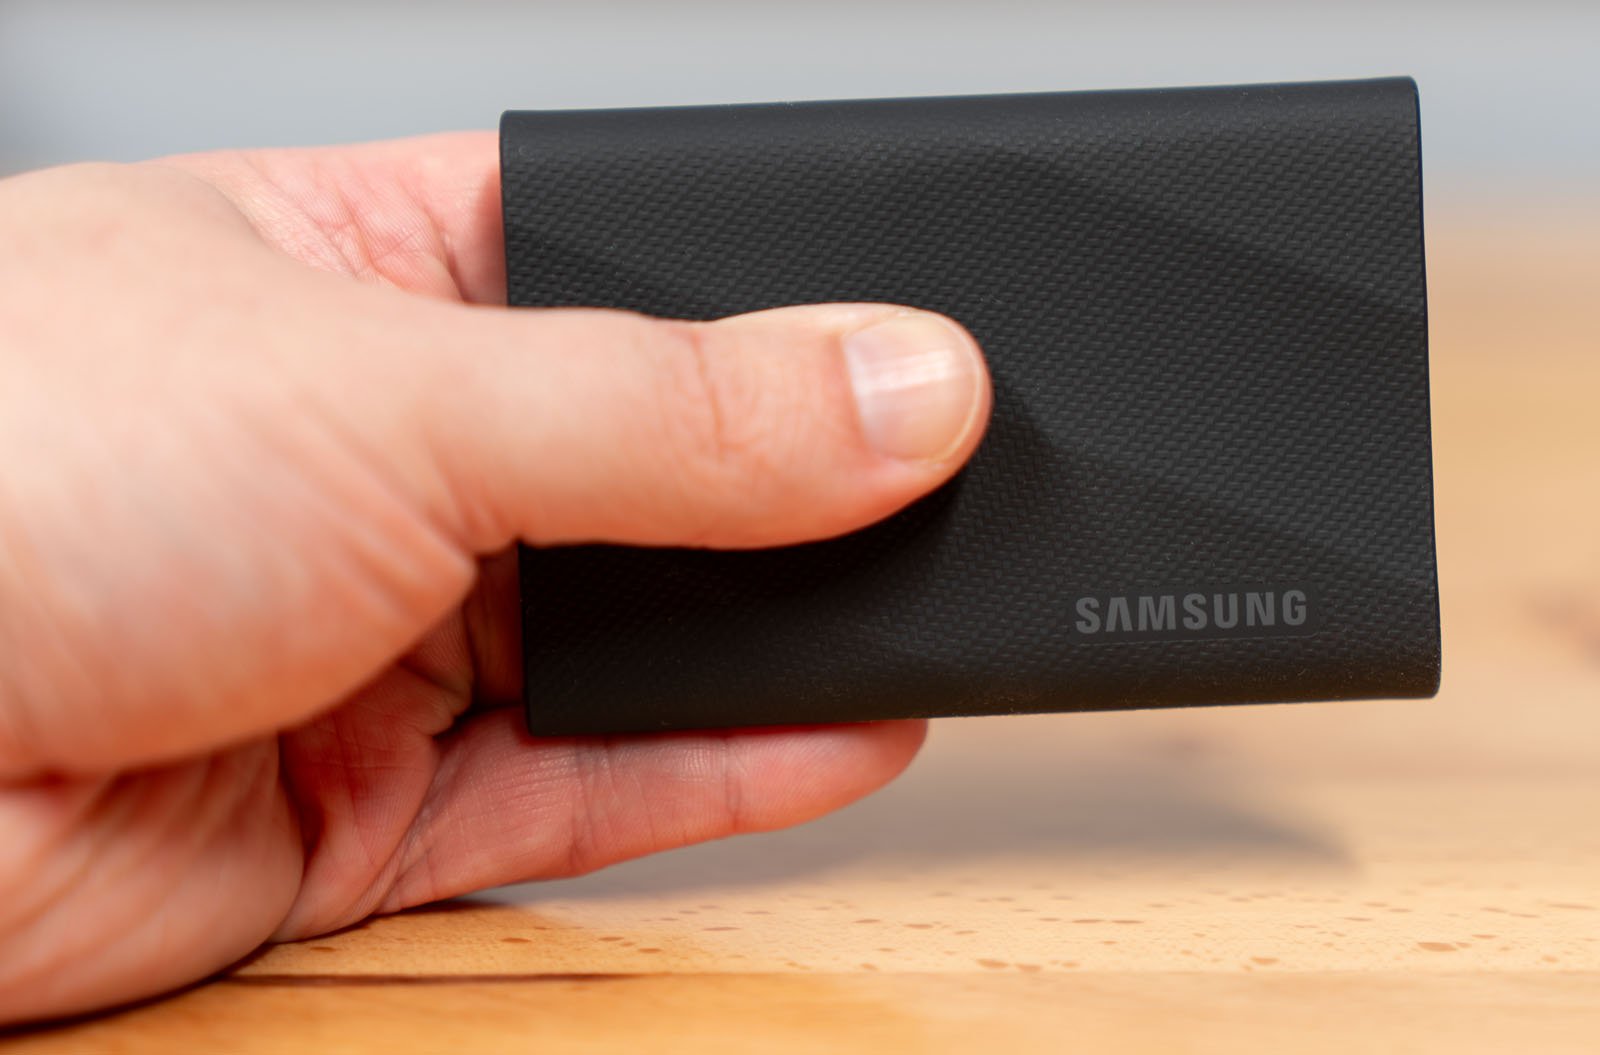 Samsung's New Compact T9 Shield SSD is Much Faster and More